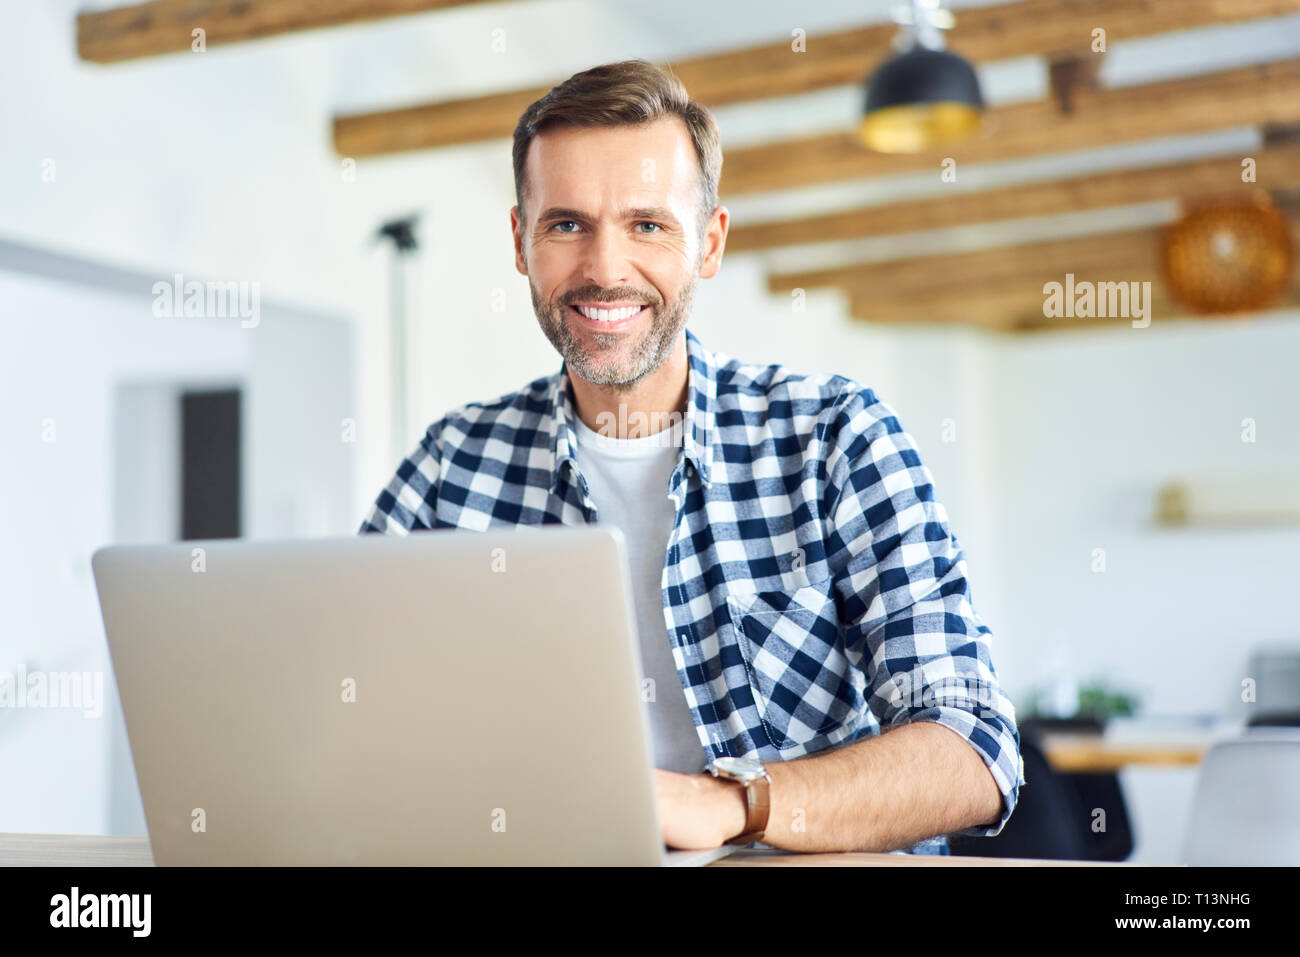 Portrait of man working remotely on laptop and looking at camera Stock Photo